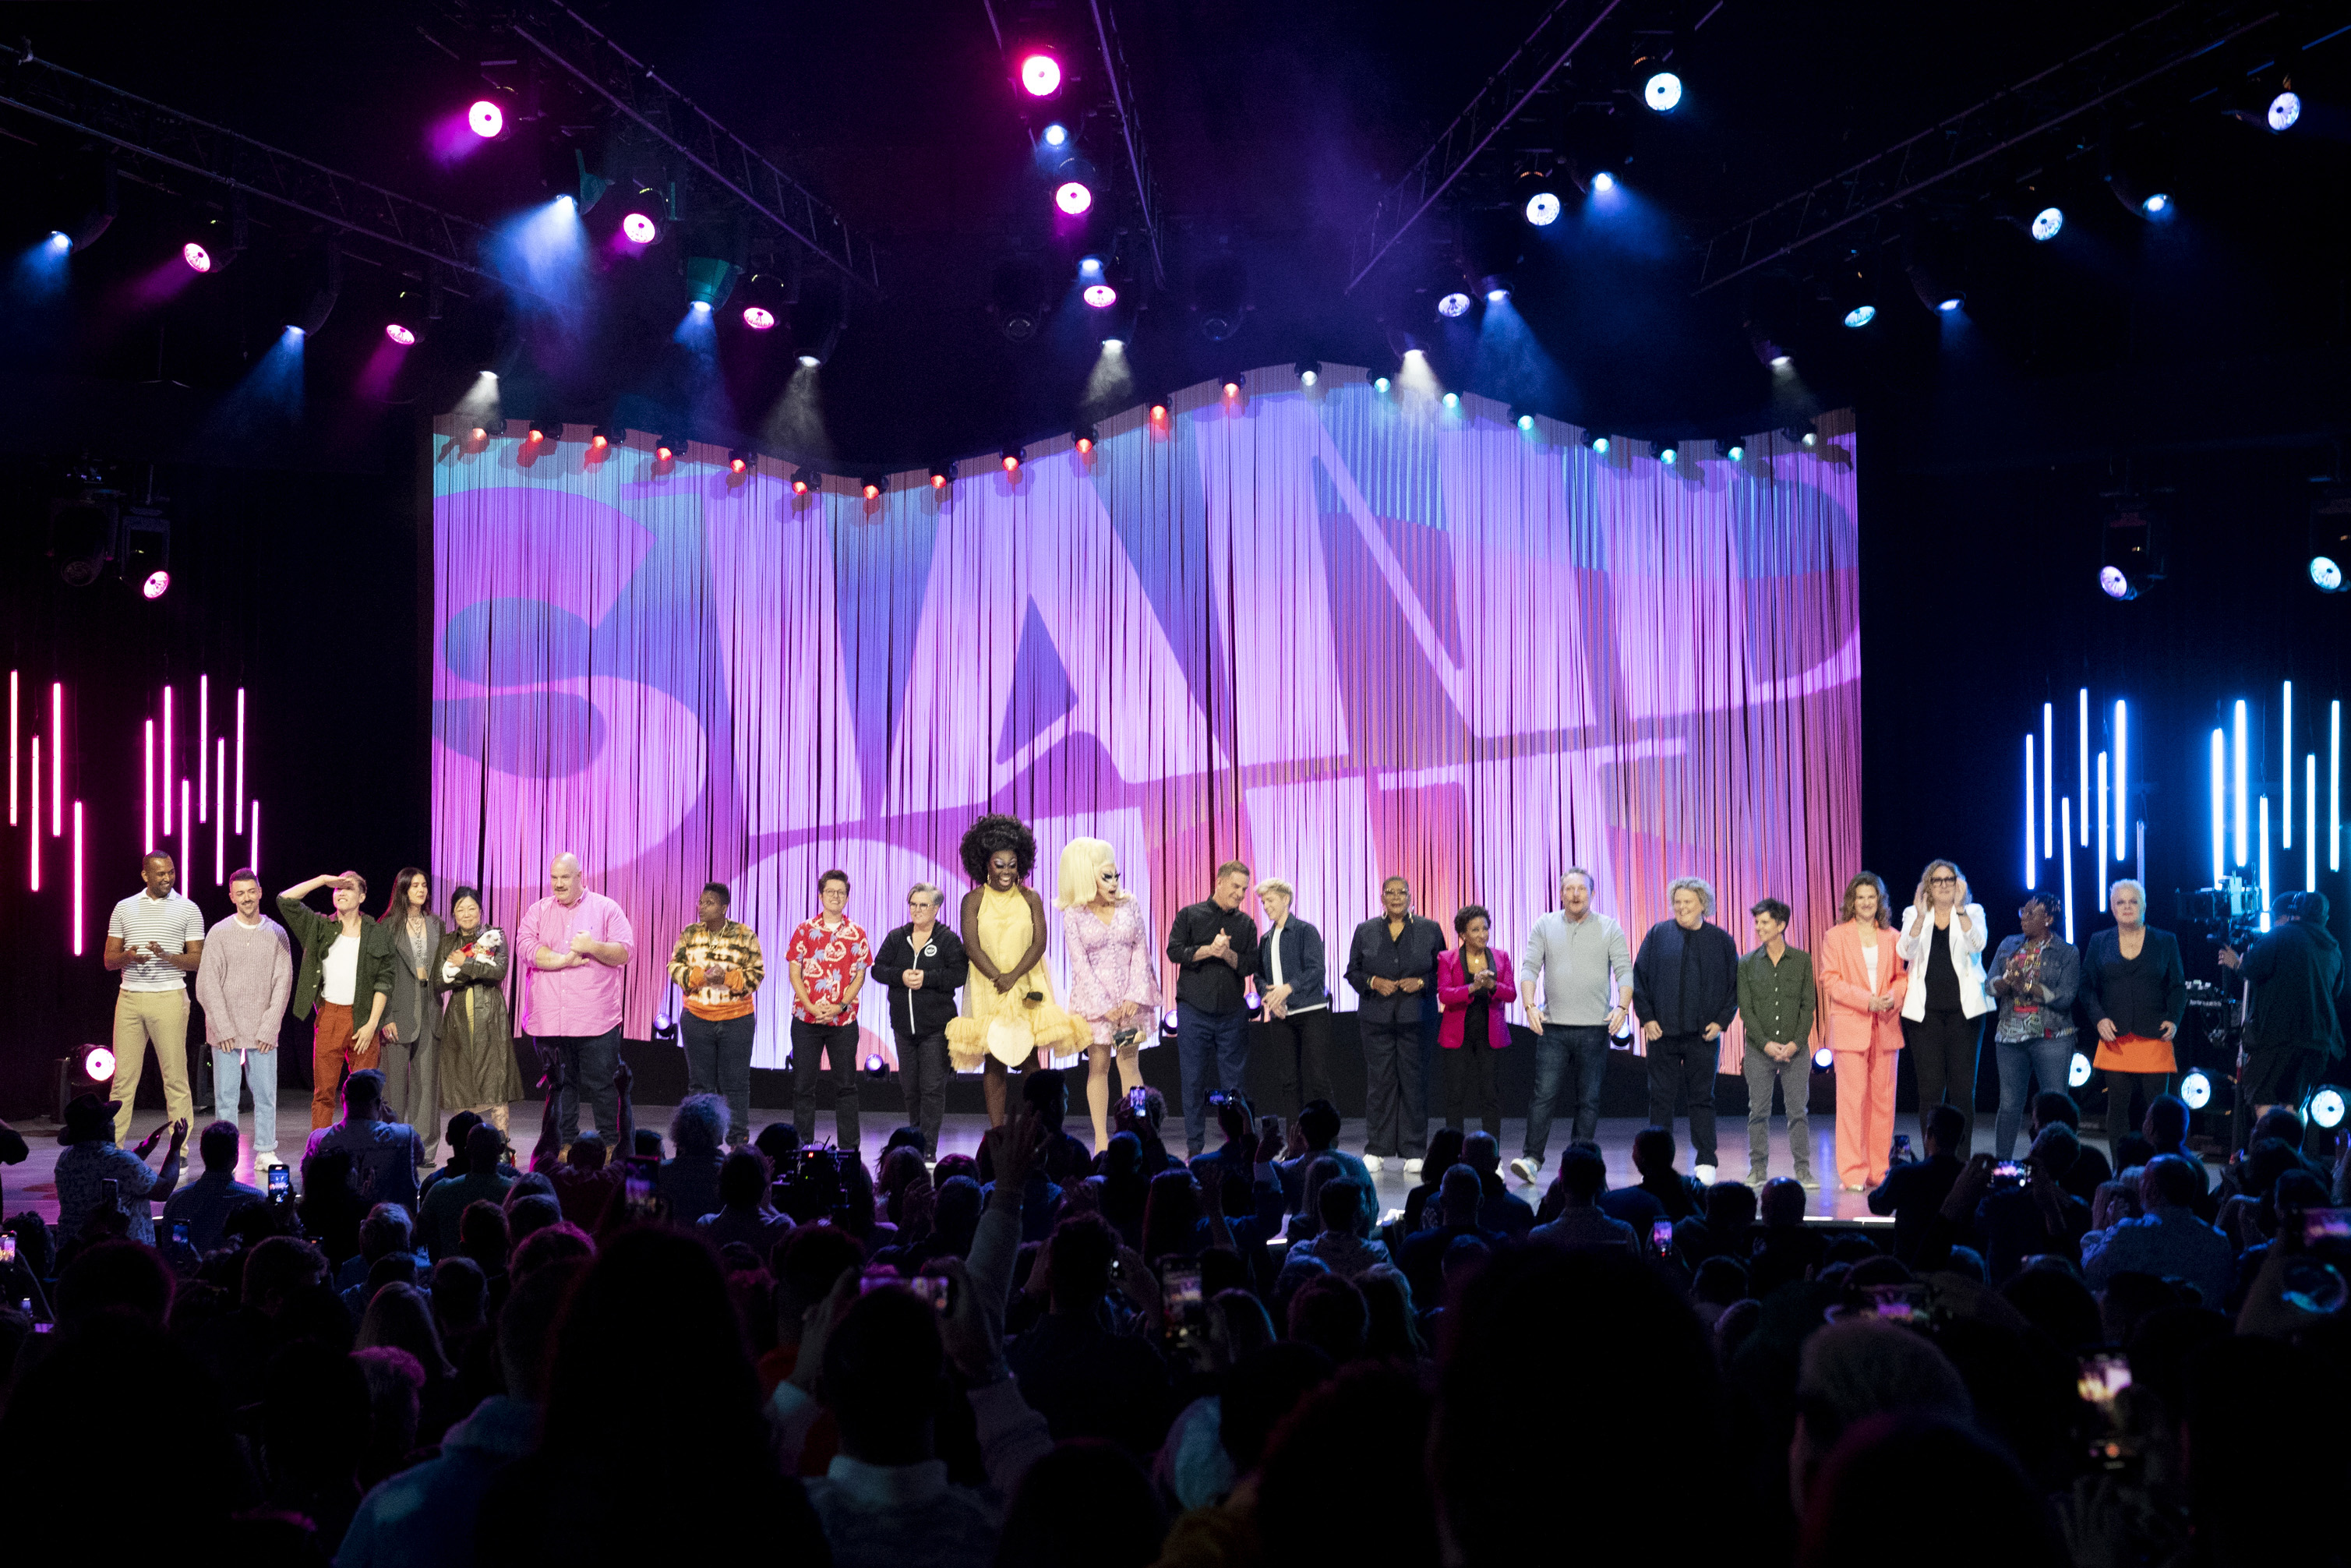 STAND OUT: AN LGBTQ+ CELEBRATION AT THE GREEK THEATRE AT NETFLIX IS A JOKE: THE FESTIVAL Photo credit: Beth Dubber / courtesy of Netflix